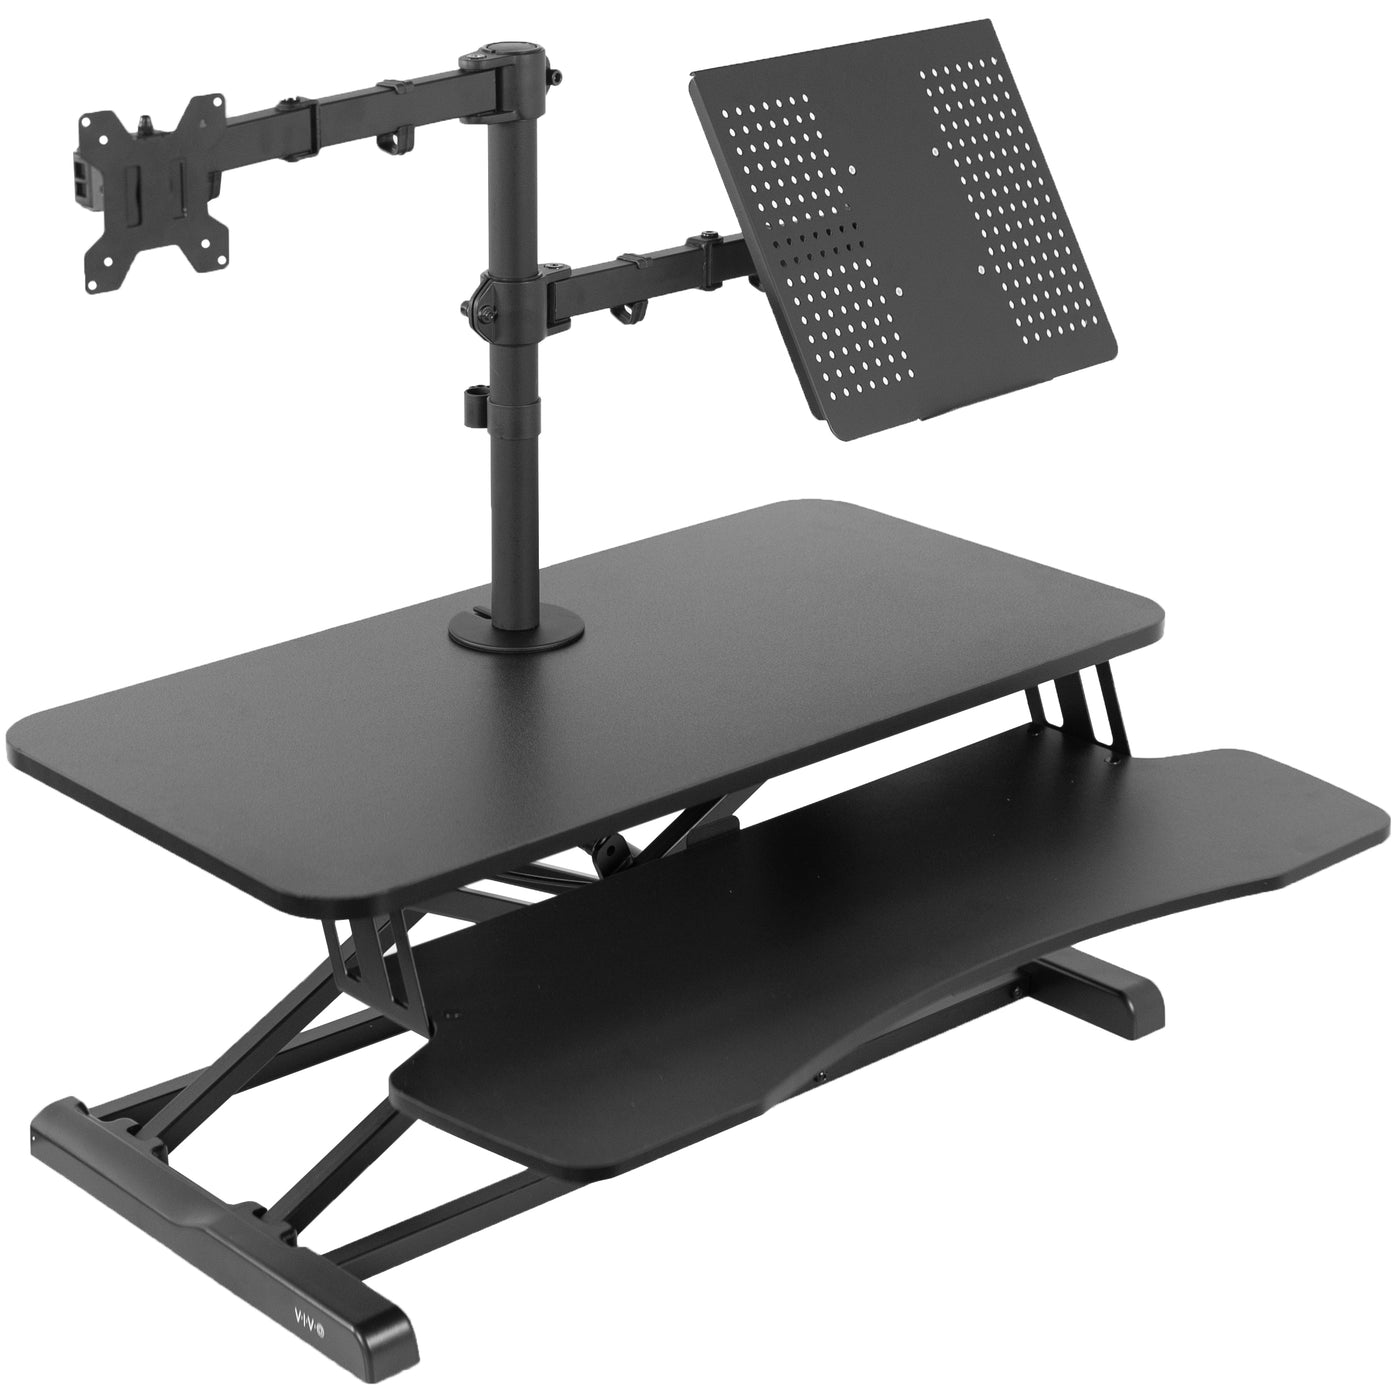 Sit to stand desk riser with built-in monitor mount and laptop mount.